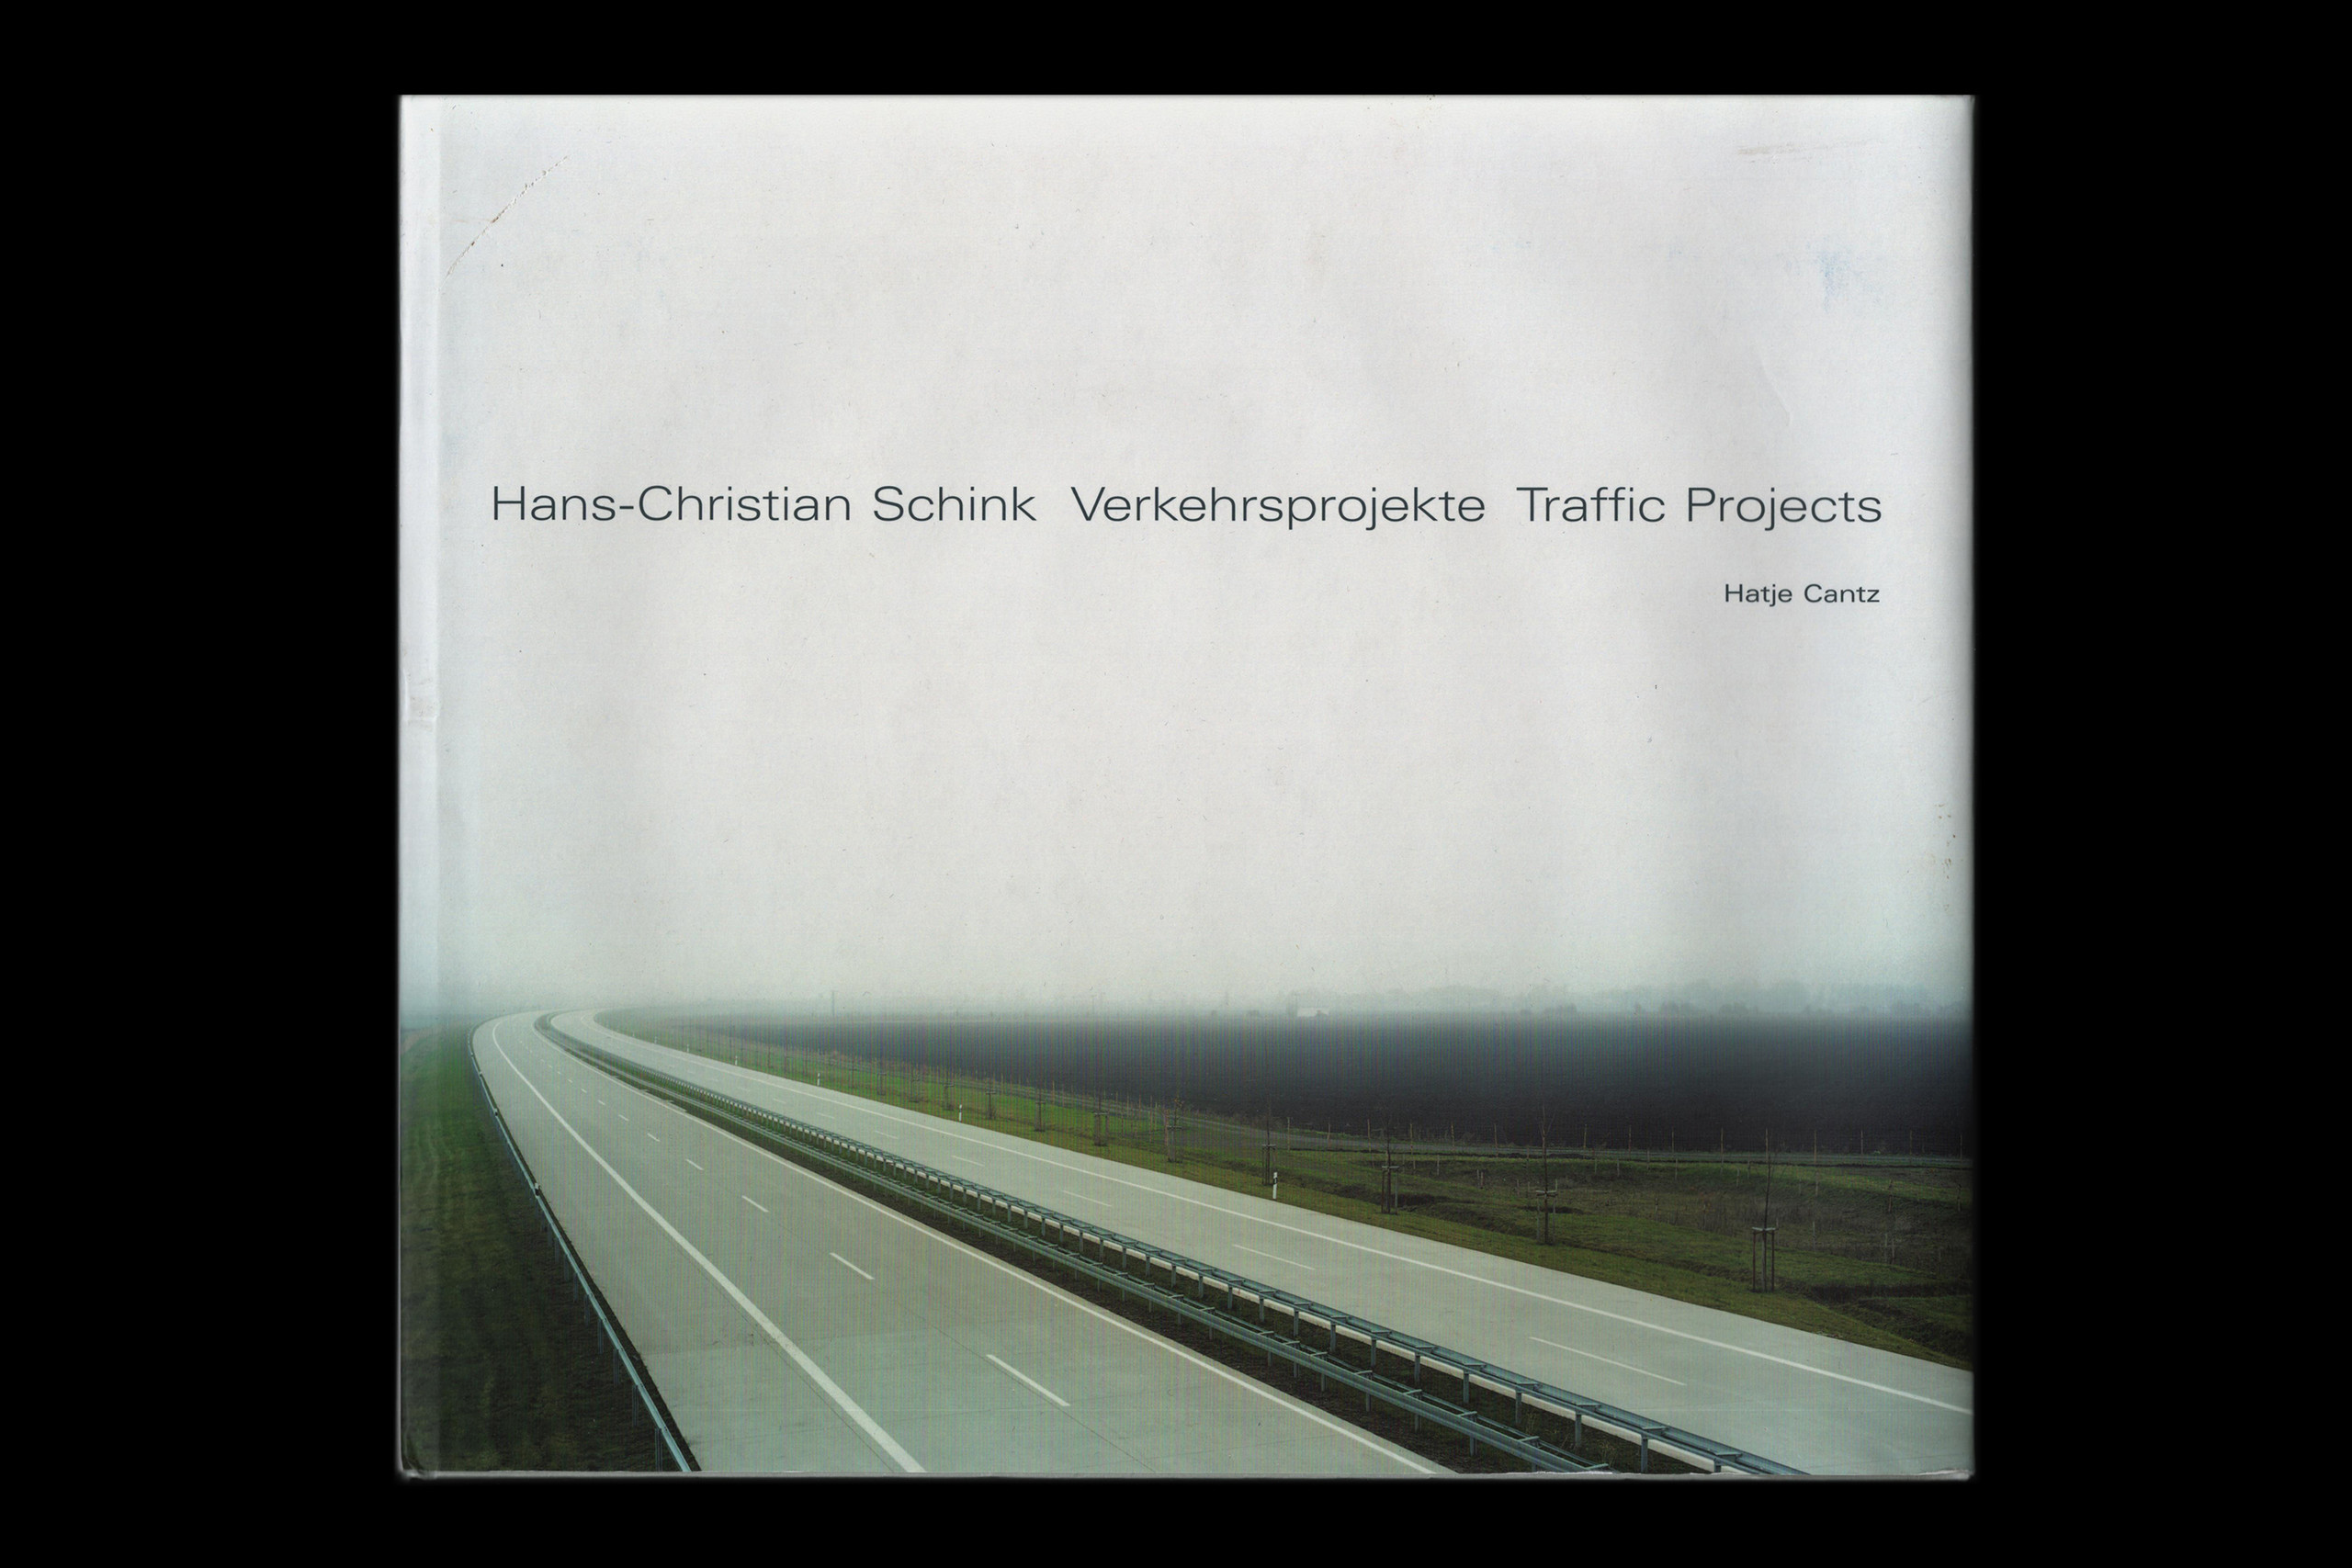 Traffic Projects by Hans-Christian Schink